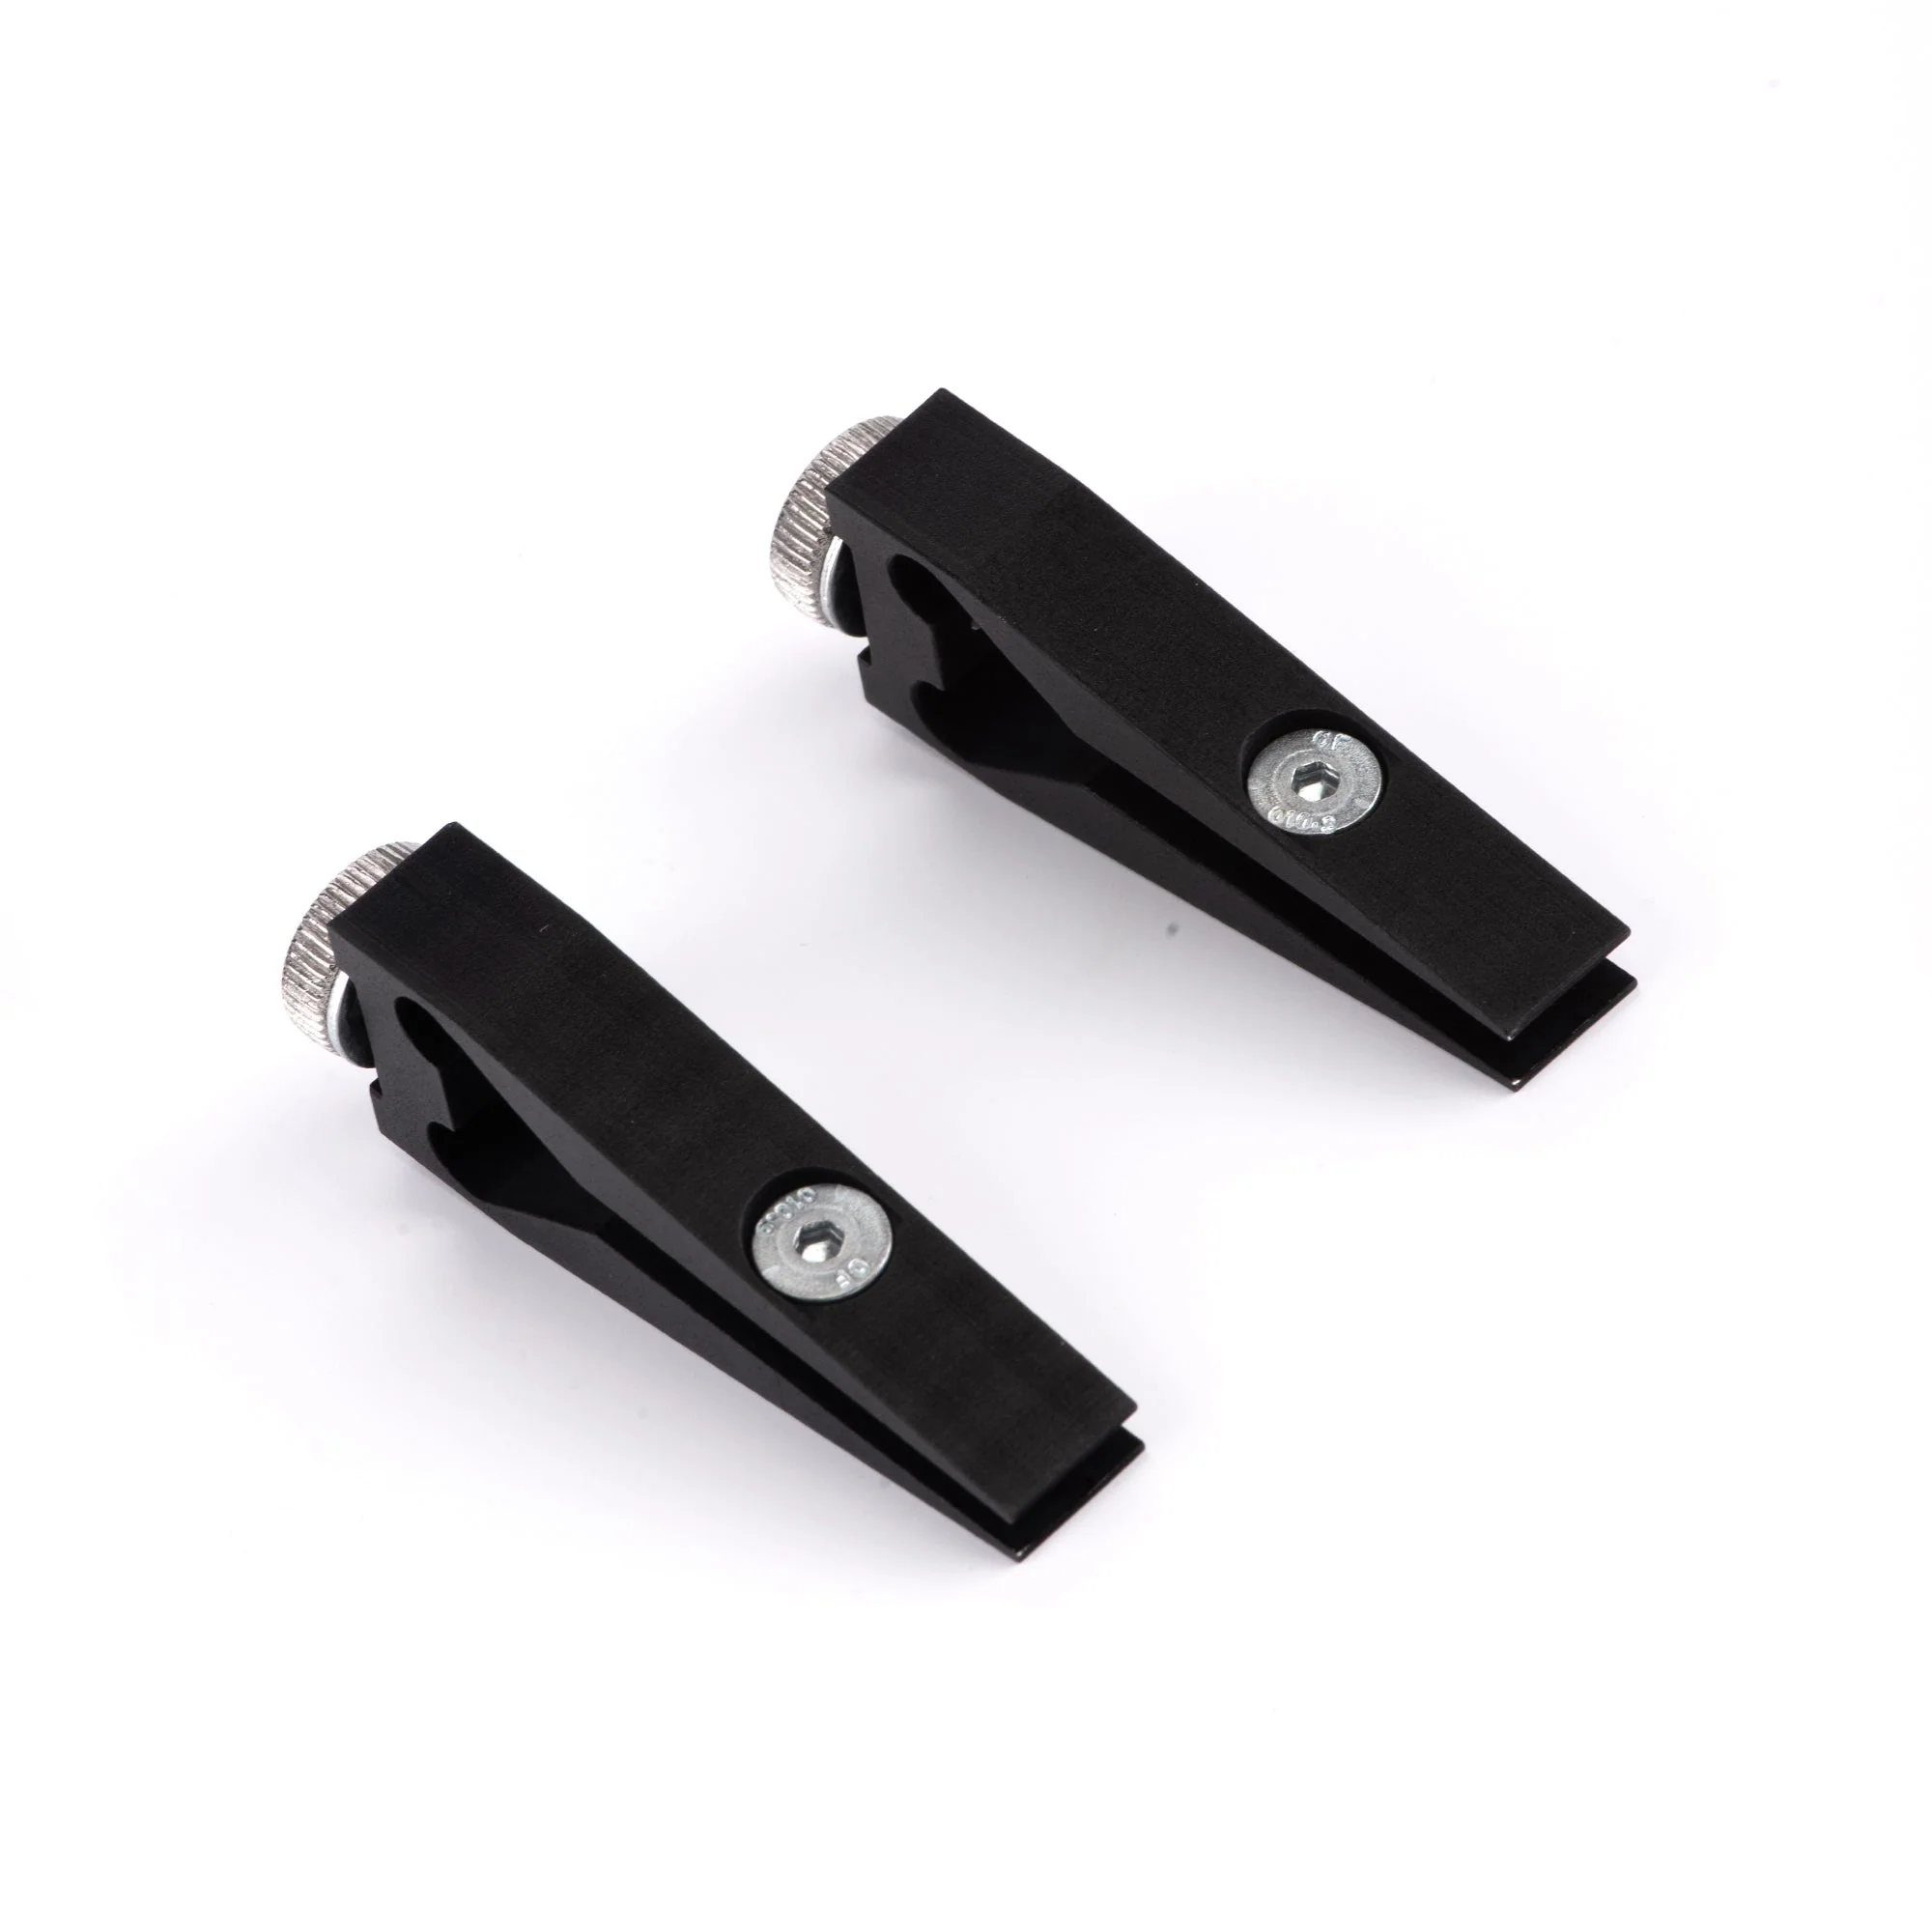 Hapstone R2 Lite Clamps (Set of 2) Questions & Answers